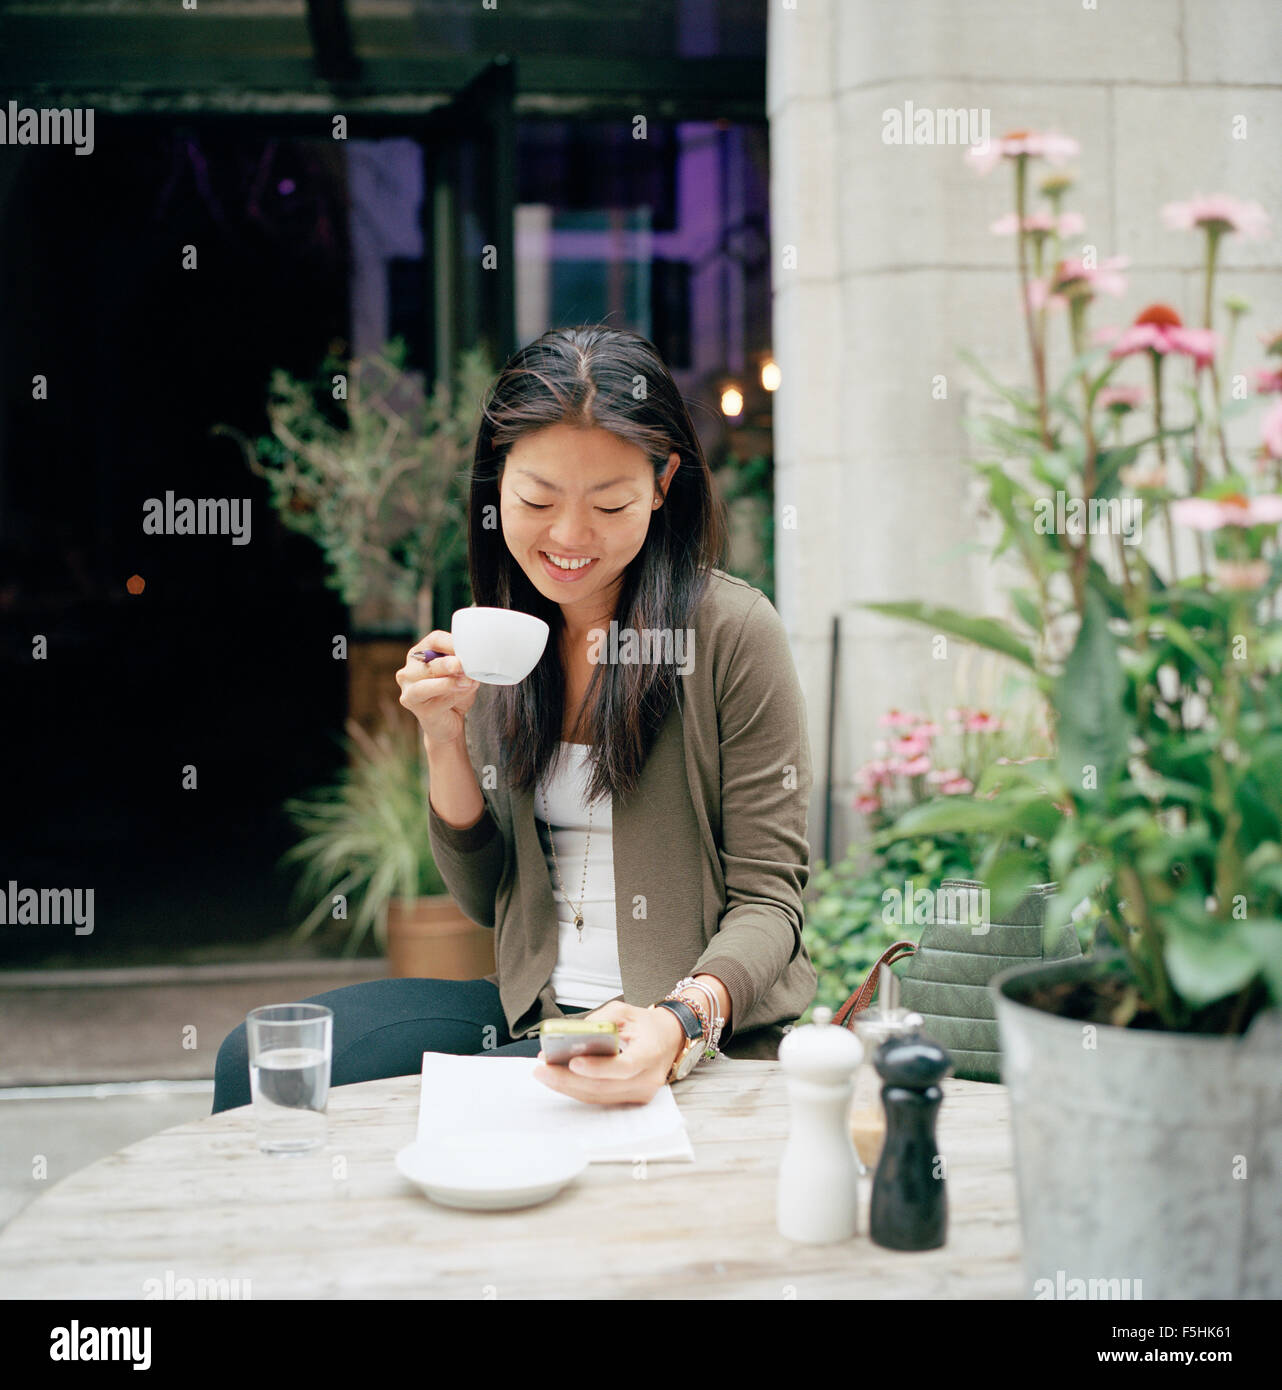 Sweden, Stockholm, Ostermalm, Smiling woman sitting at sidewalk cafe and text messaging Stock Photo